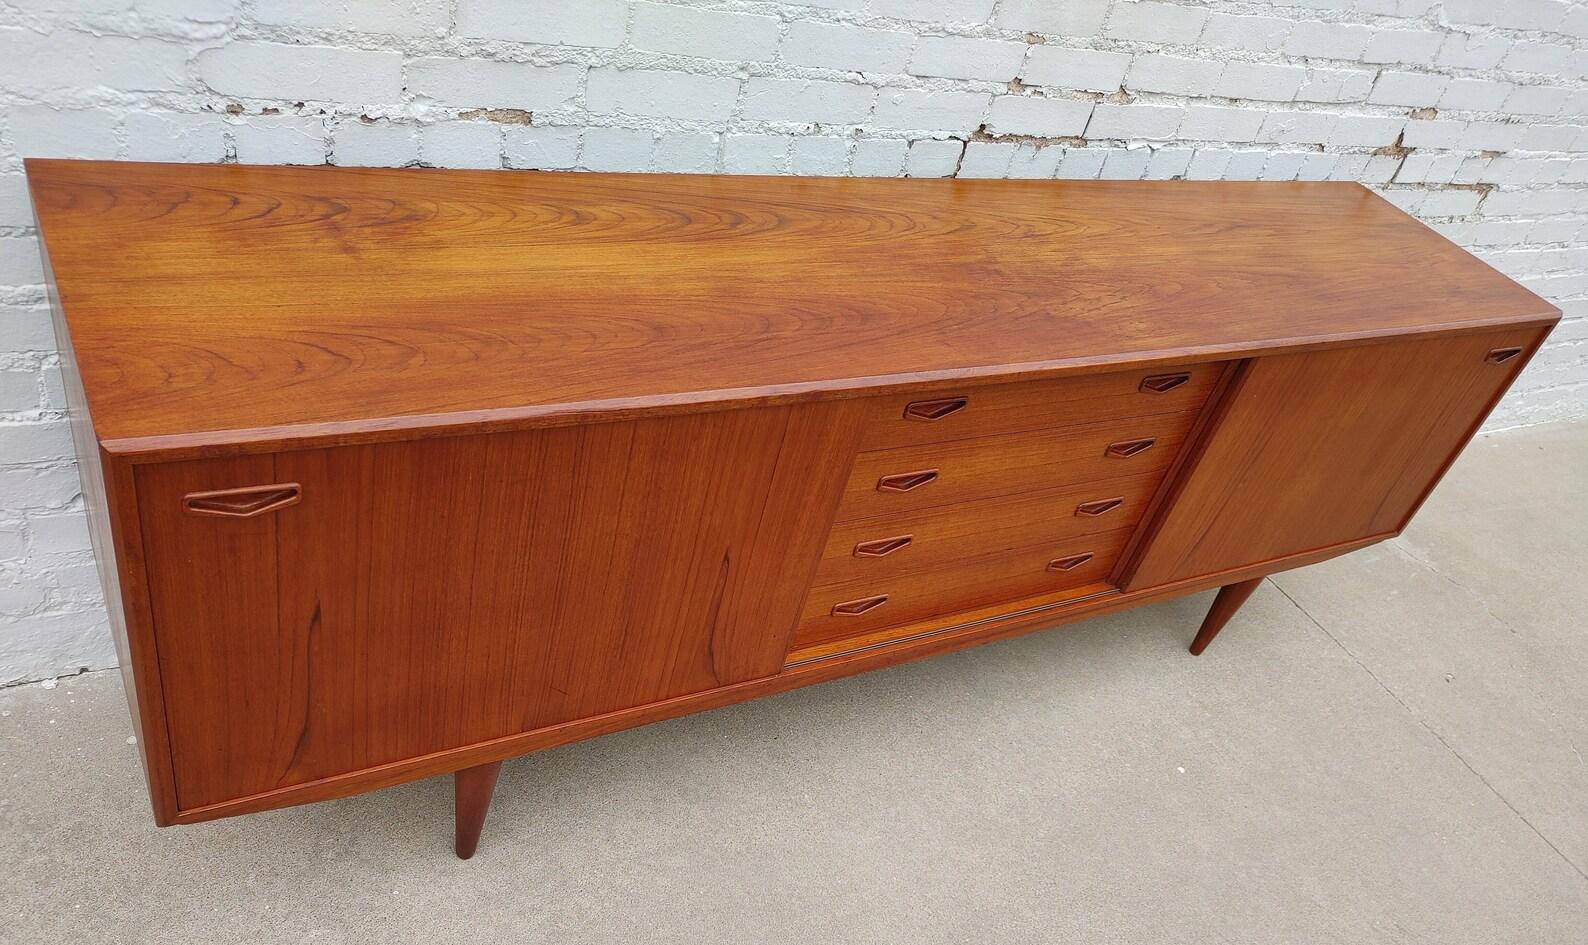 Mid Century Modern Clausen and Son Teak Credenza

Above average vintage condition and structurally sound. Has some expected slight finish wear and scratching.  Has some discoloration on top from refinishing. Please request additional pictures.